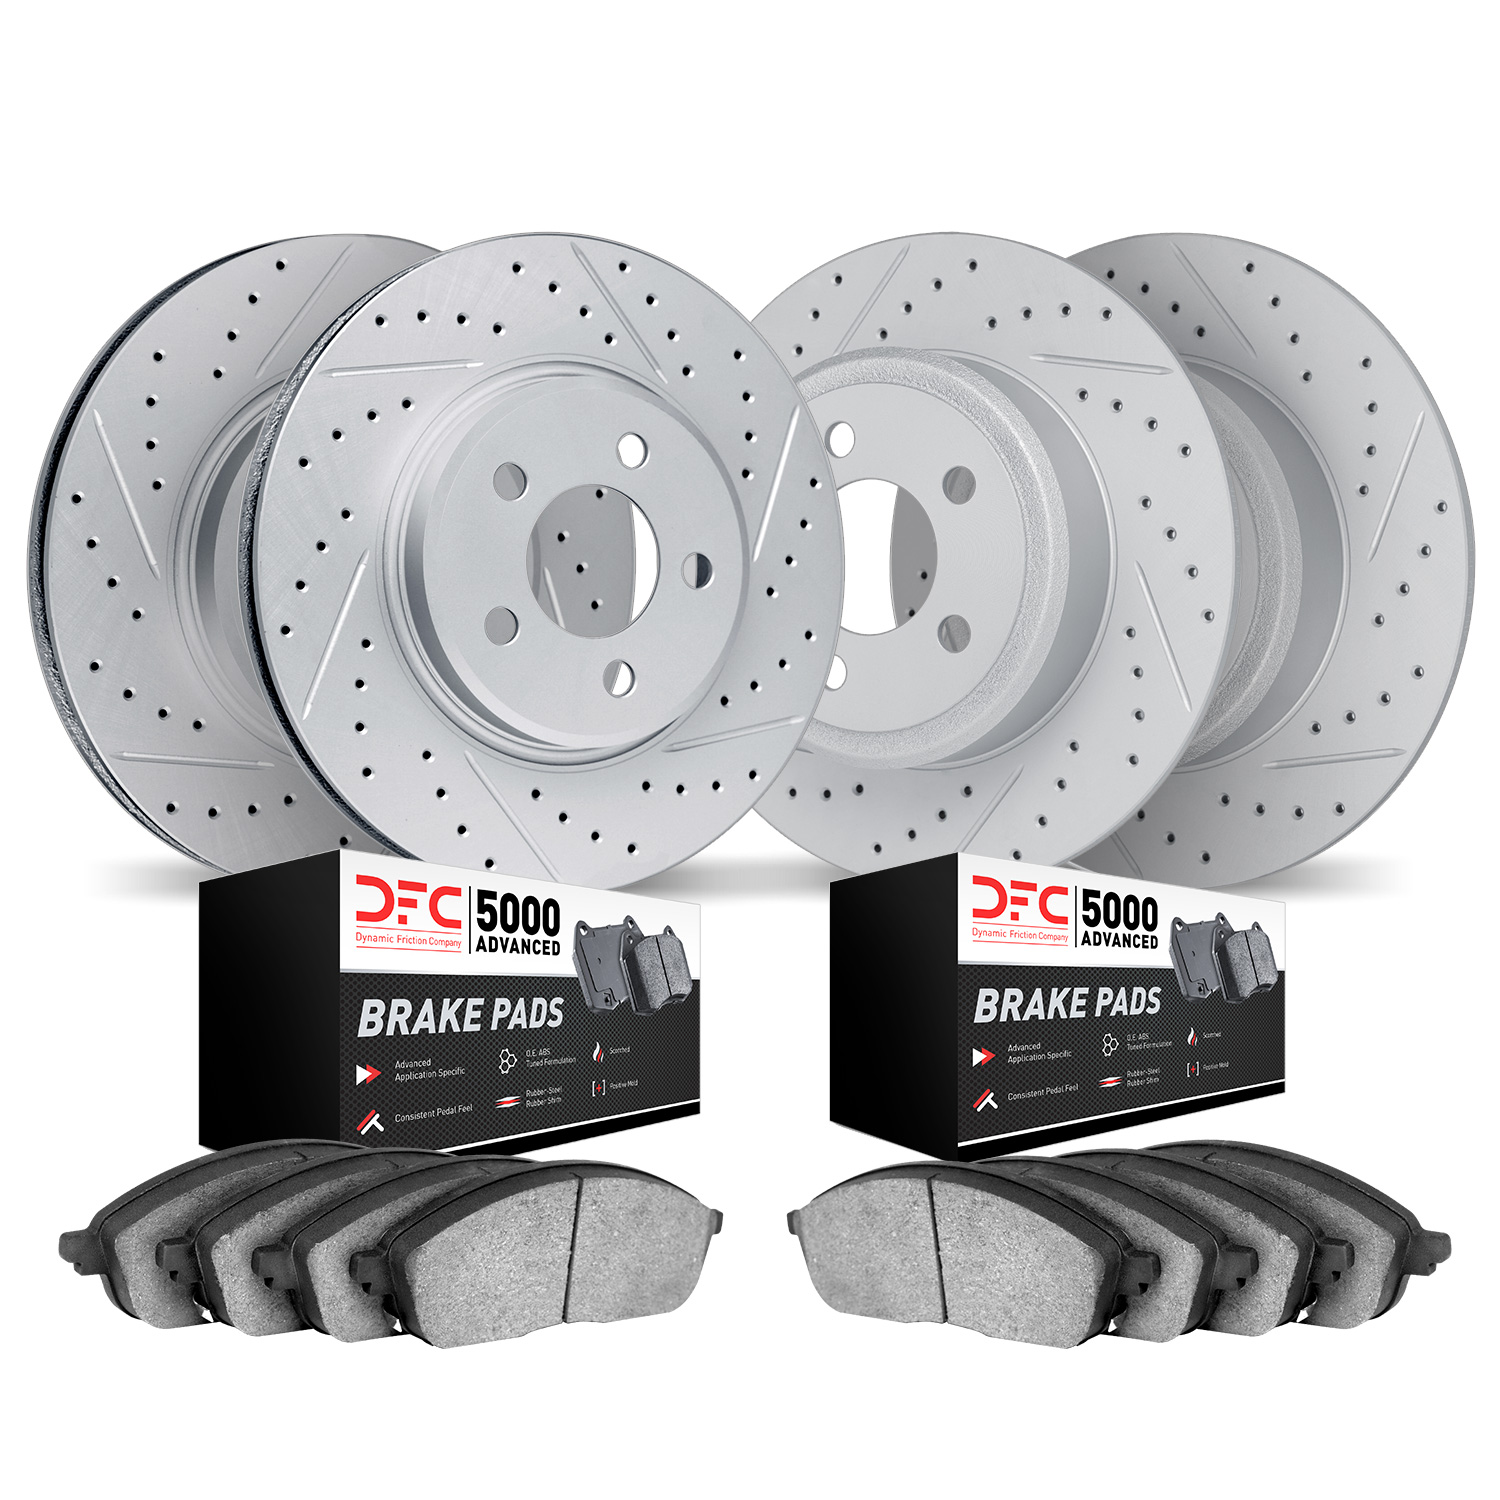 2504-27005 Geoperformance Drilled/Slotted Rotors w/5000 Advanced Brake Pads Kit, 2004-2013 Volvo, Position: Front and Rear